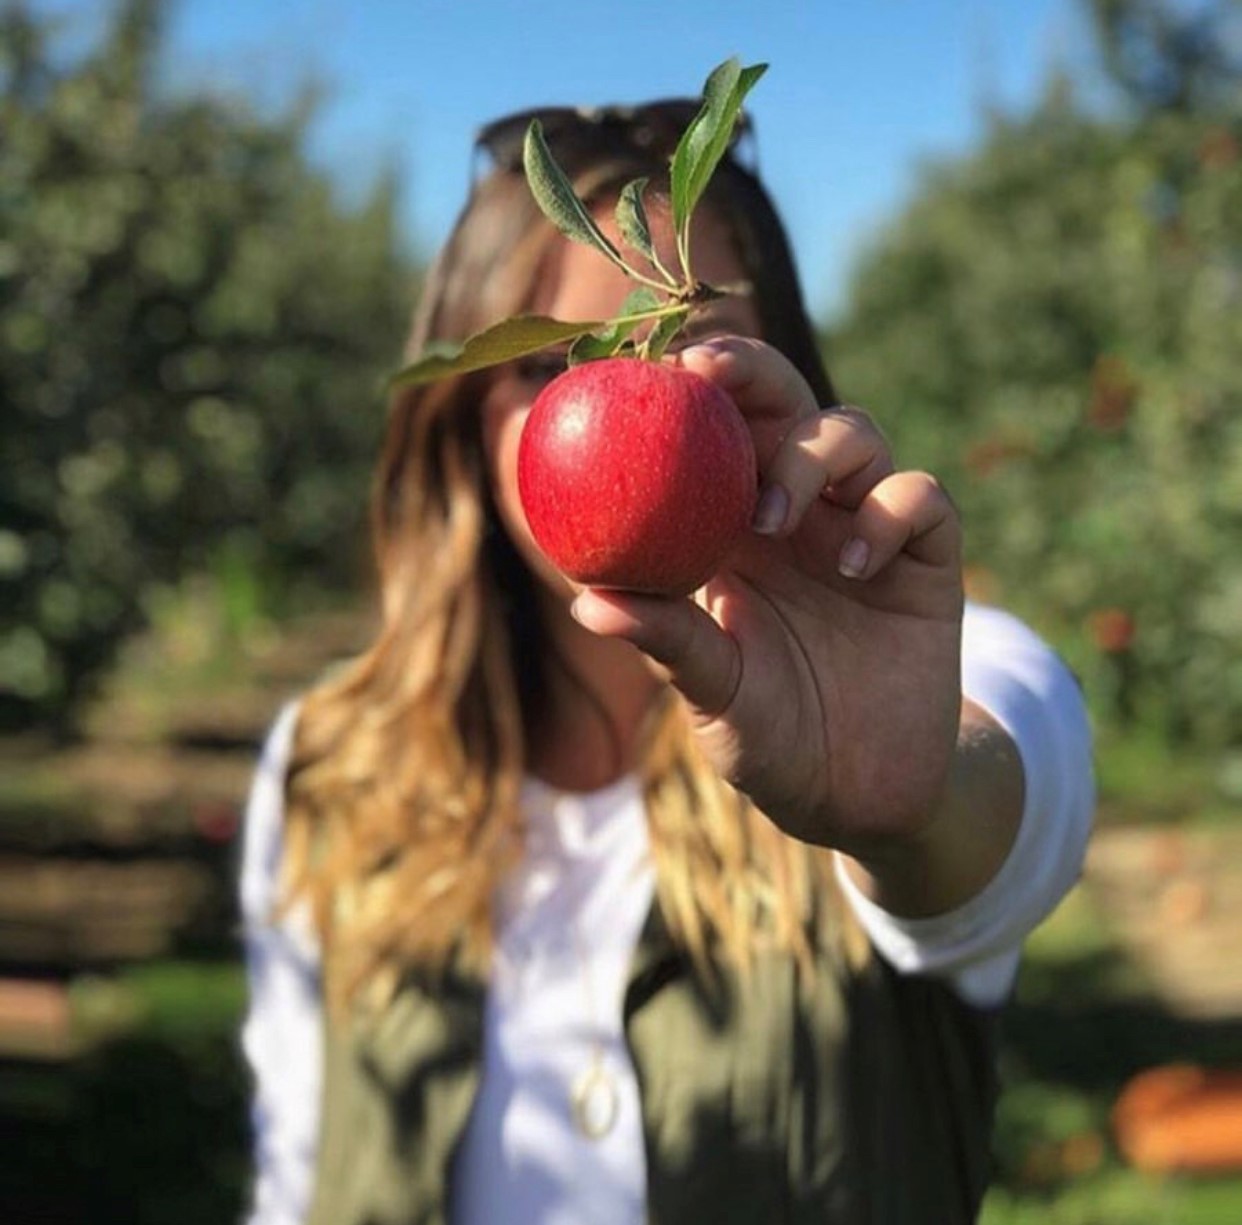 Woman holding a red apple in front of her face in an apple orchard.